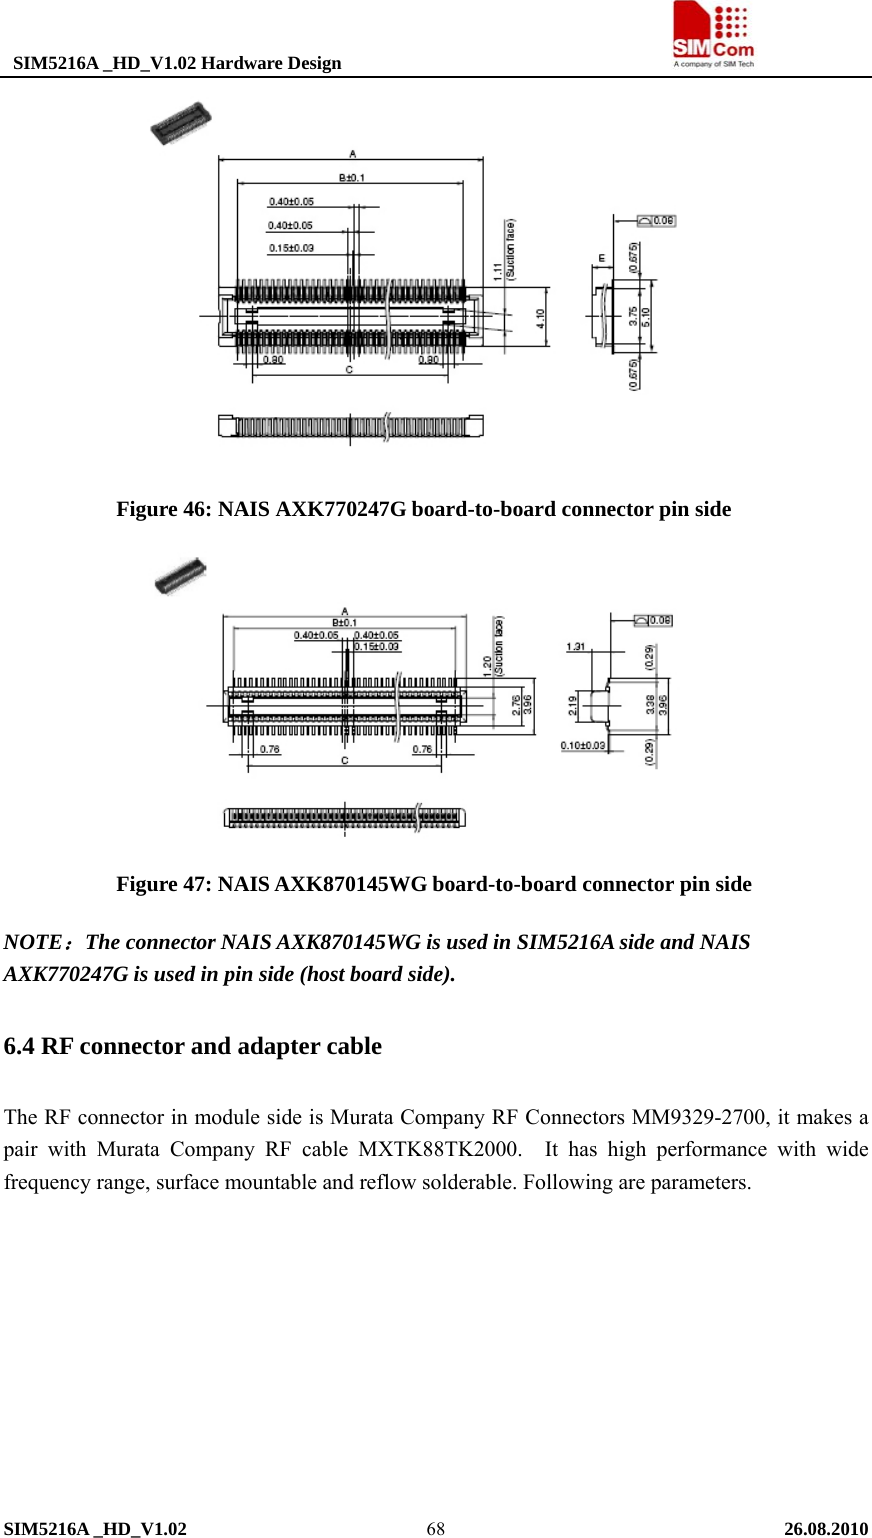  SIM5216A _HD_V1.02 Hardware Design                                     SIM5216A _HD_V1.02   26.08.2010   68 Figure 46: NAIS AXK770247G board-to-board connector pin side                 Figure 47: NAIS AXK870145WG board-to-board connector pin side NOTE：The connector NAIS AXK870145WG is used in SIM5216A side and NAIS AXK770247G is used in pin side (host board side). 6.4 RF connector and adapter cable The RF connector in module side is Murata Company RF Connectors MM9329-2700, it makes a pair with Murata Company RF cable MXTK88TK2000.  It has high performance with wide frequency range, surface mountable and reflow solderable. Following are parameters.   